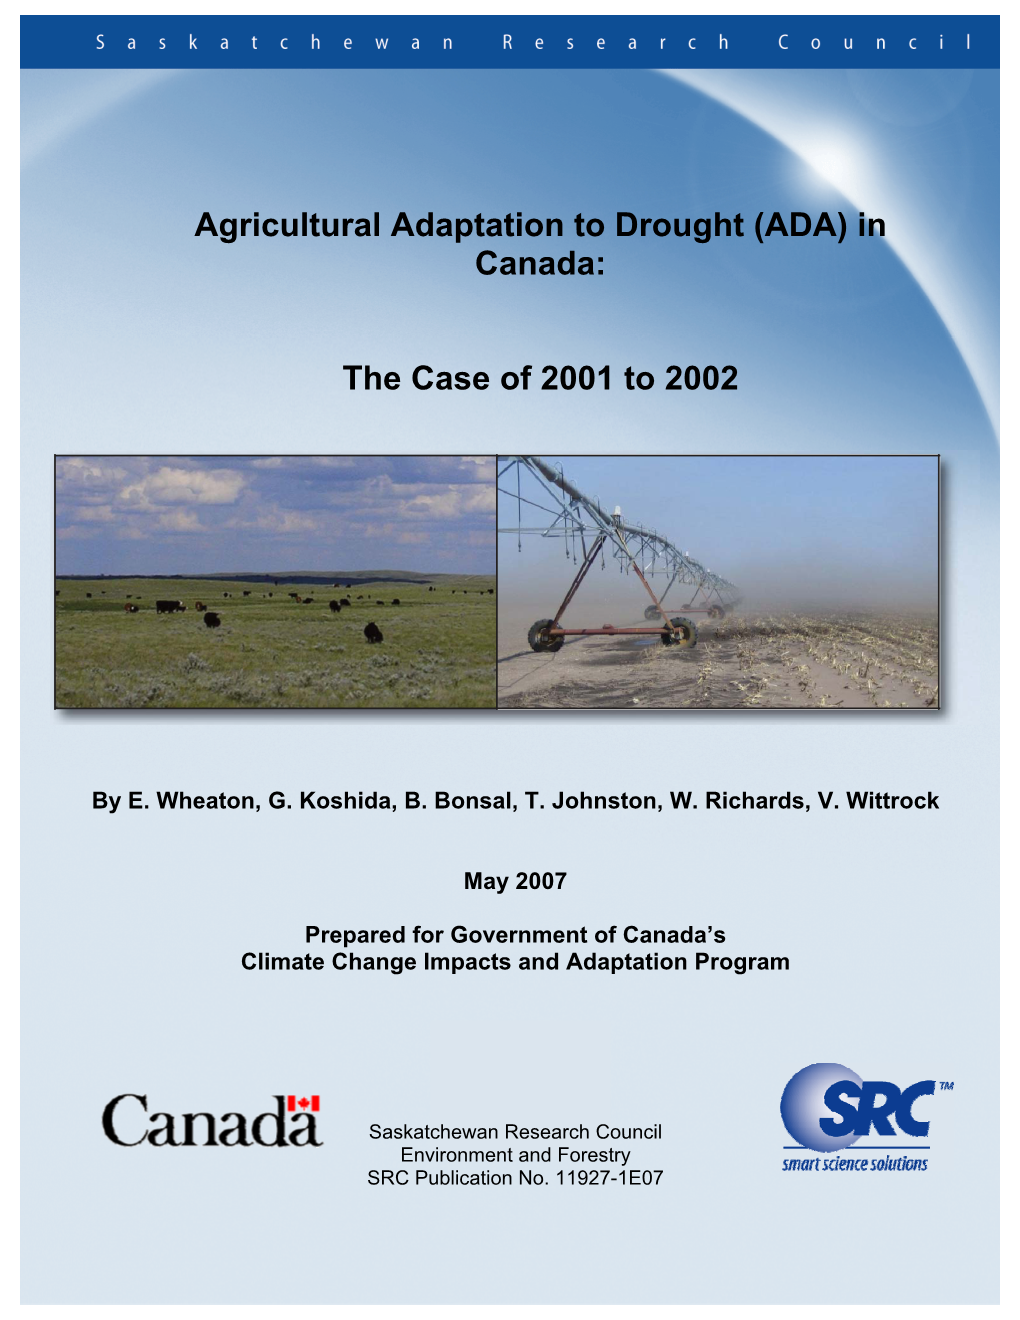 Agricultural Adaptation to Drought (ADA) in Canada